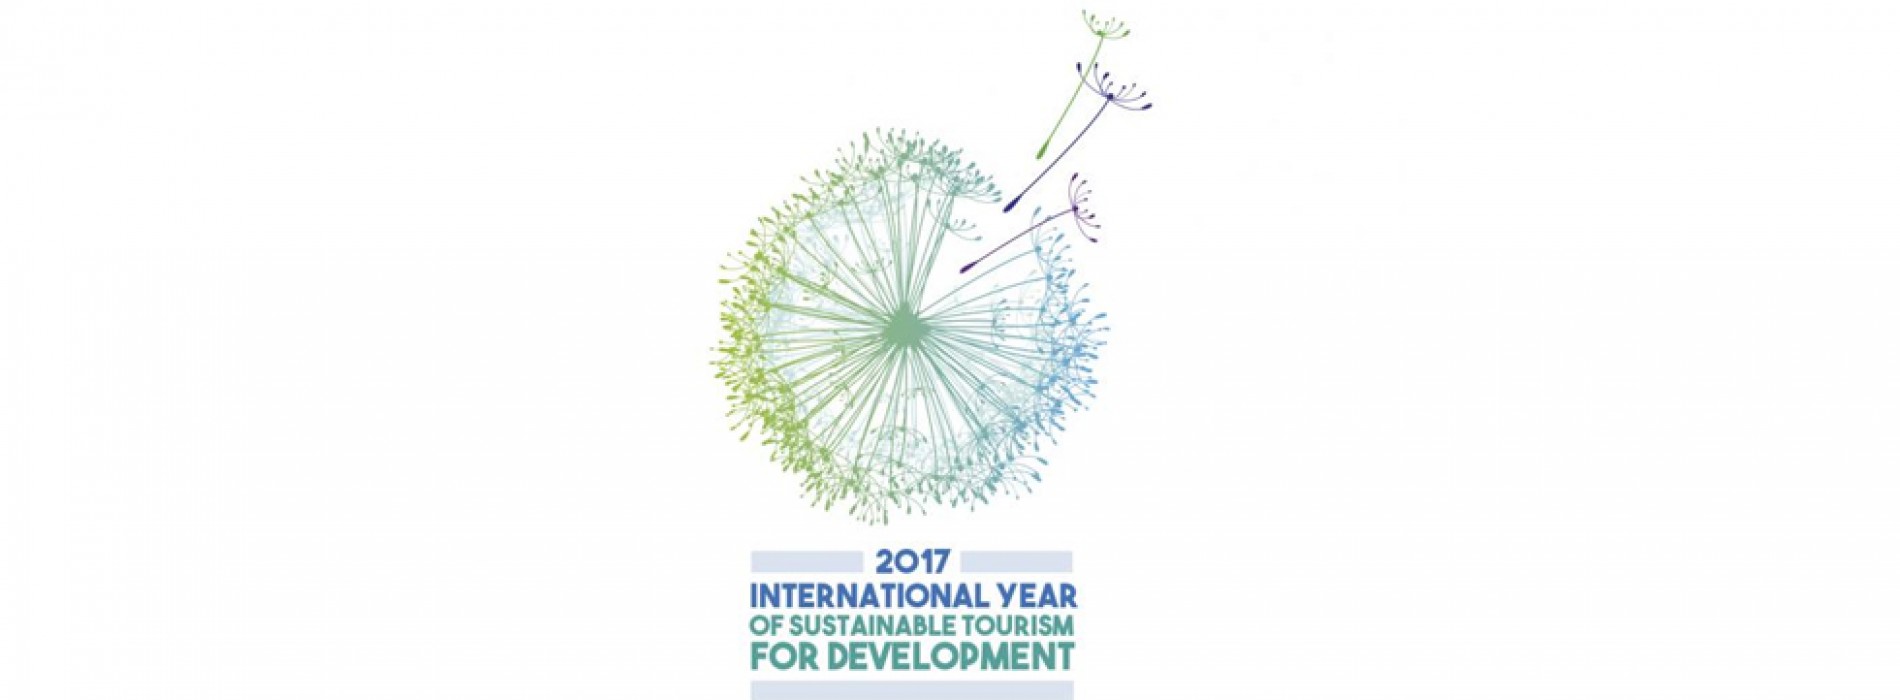 International Year of Sustainable Tourism for Development 2017 kicks off